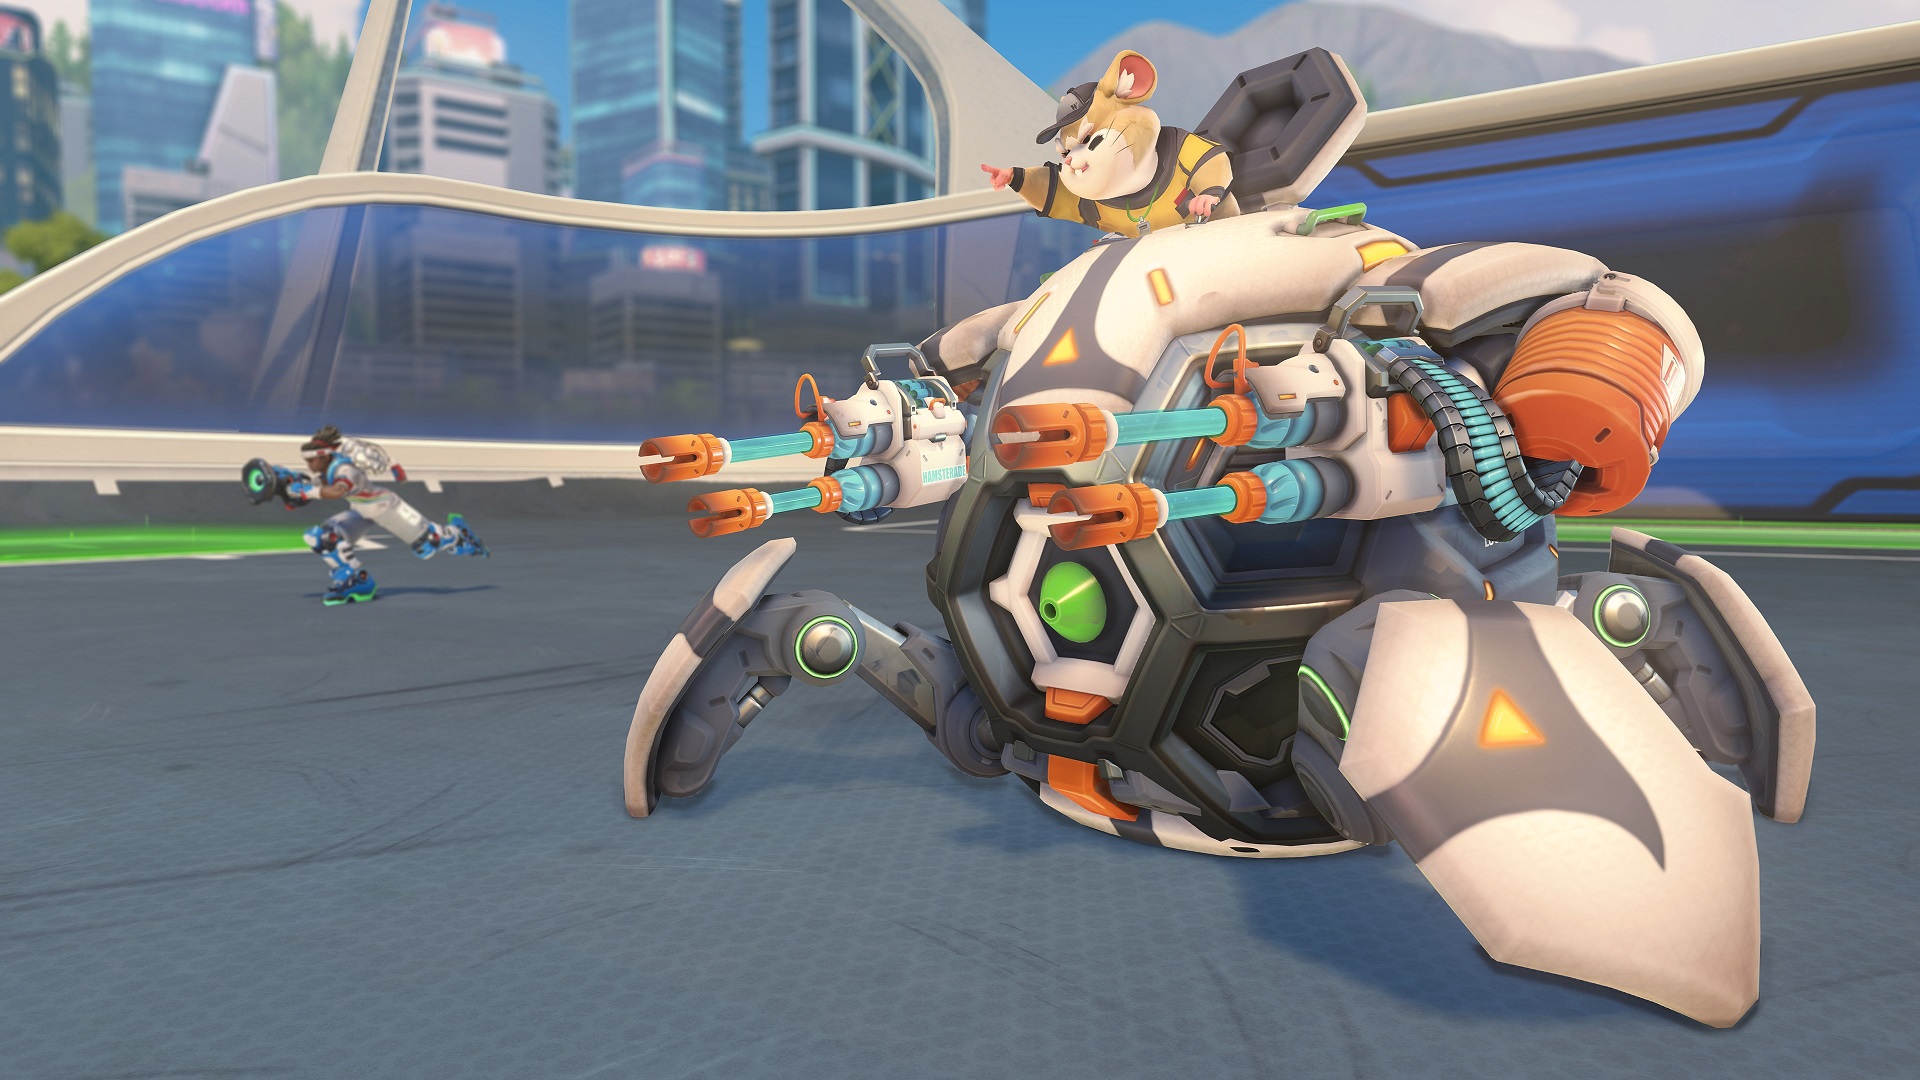 Overwatch Summer Games 2019 — New Skins, Weekly Challenges, Lúcioball